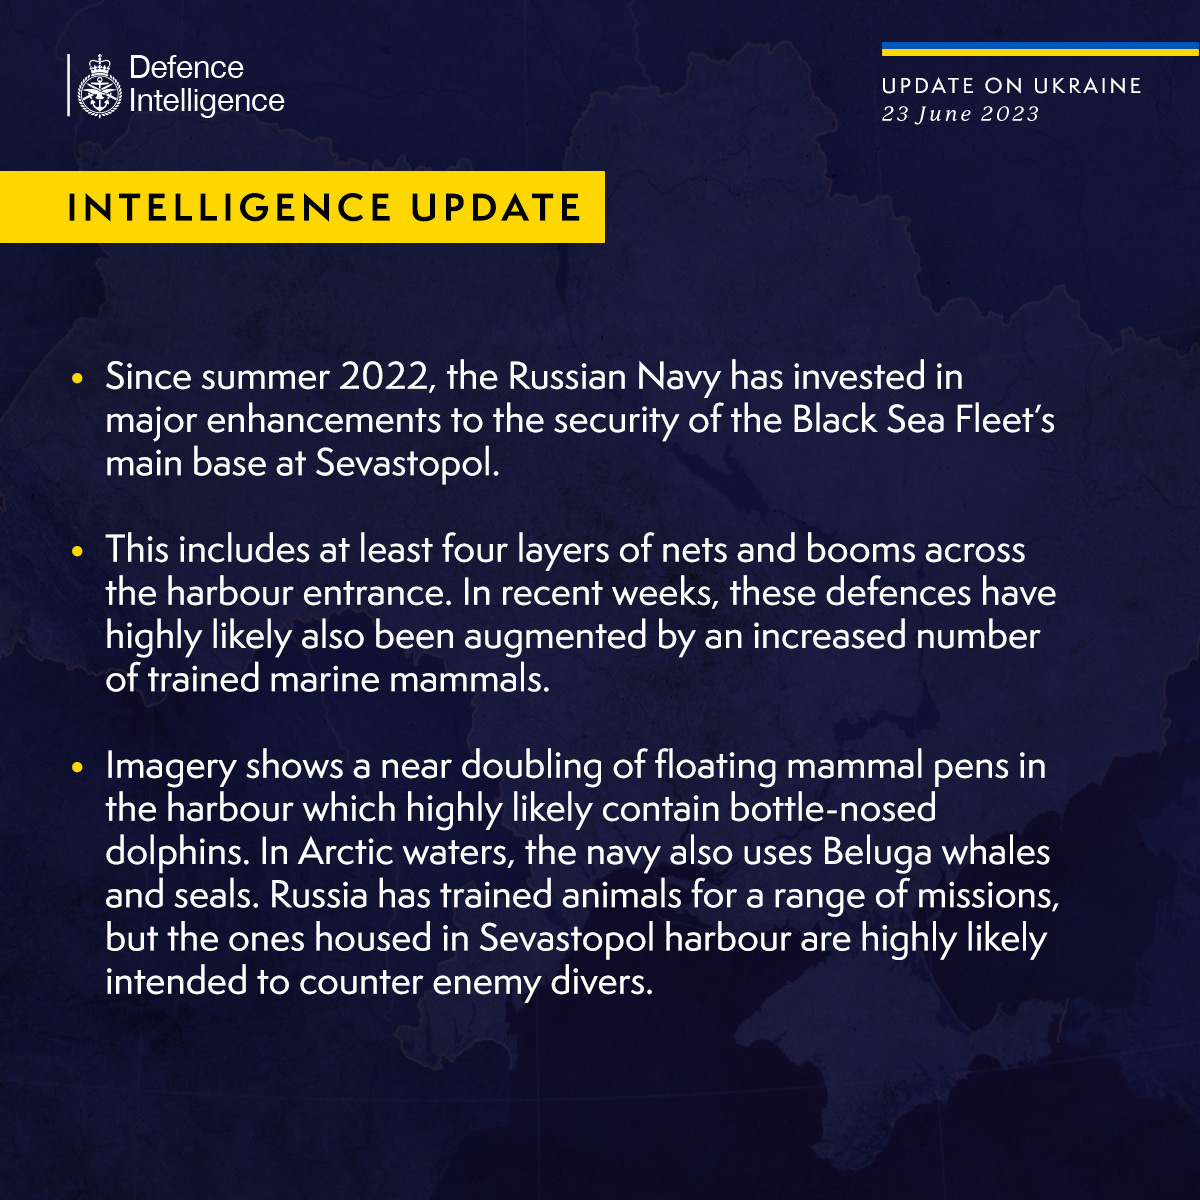 Latest Defence Intelligence update on the situation in Ukraine - 23 June 2023.